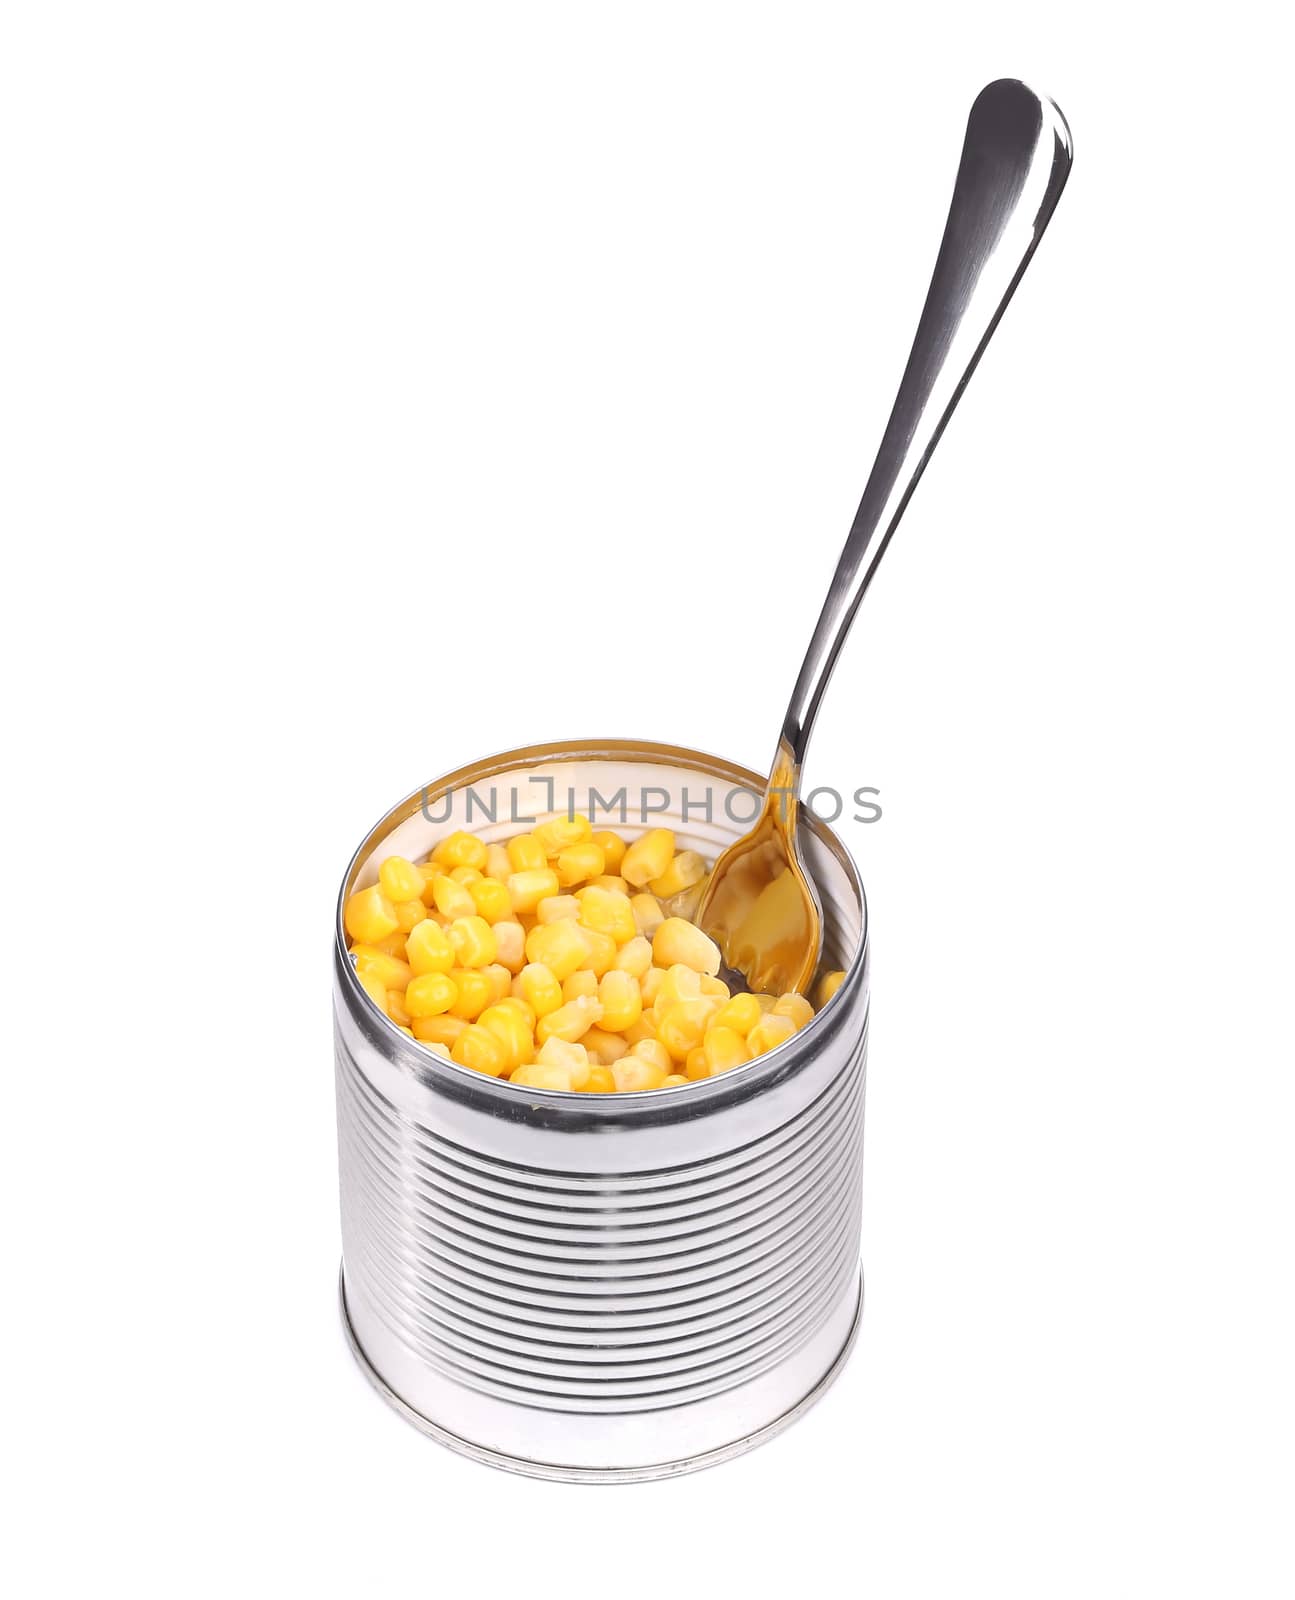 Canned sweet corn. Isolated on a white background.